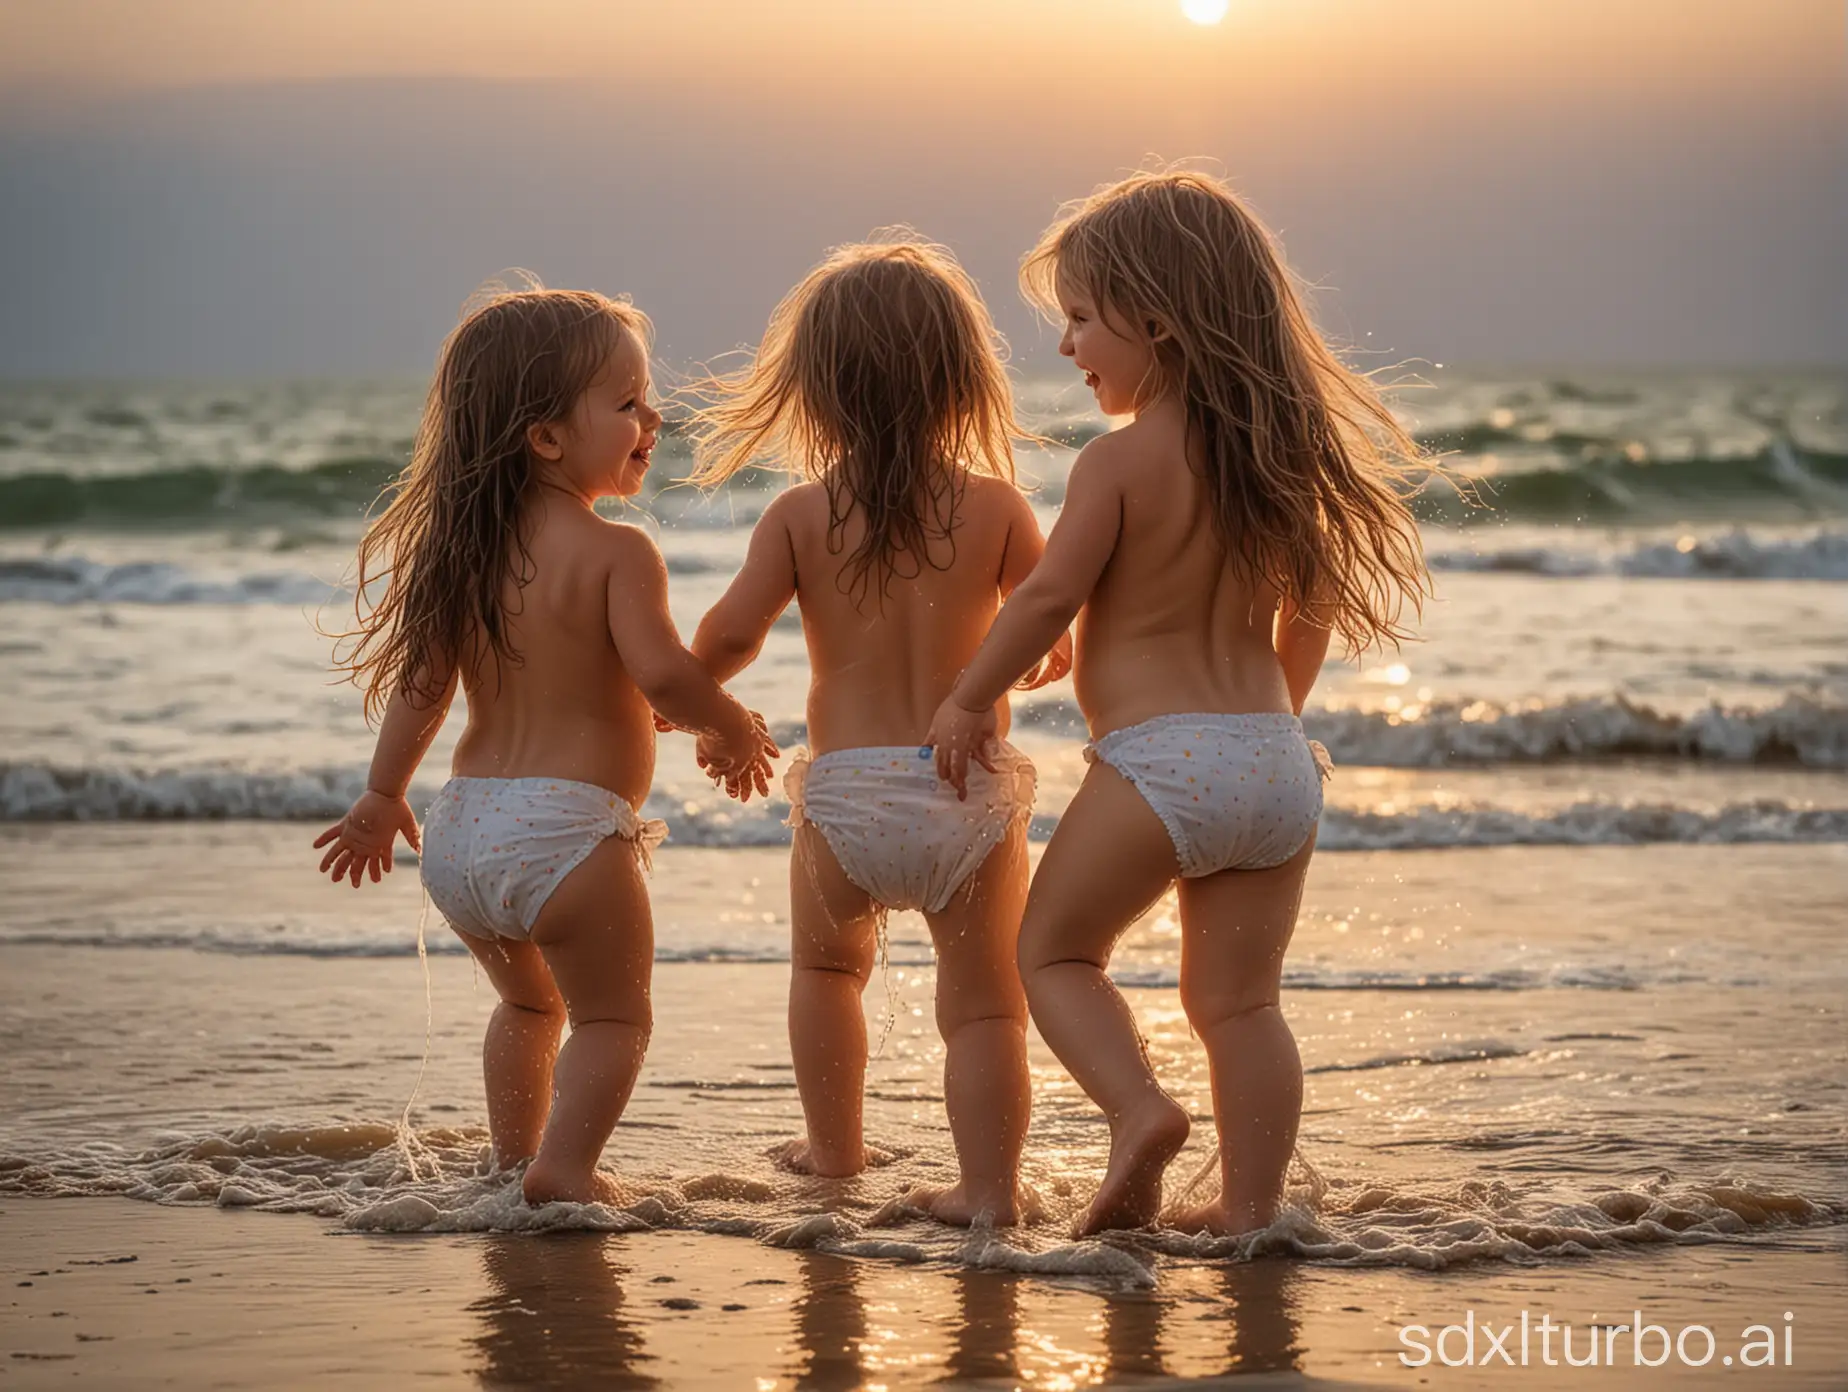 two four year old girls in diapers pampers  showing  long hair, shirtless, on beach, wet, happy, in water, picture taken from the side so you can see face also, in setting sun